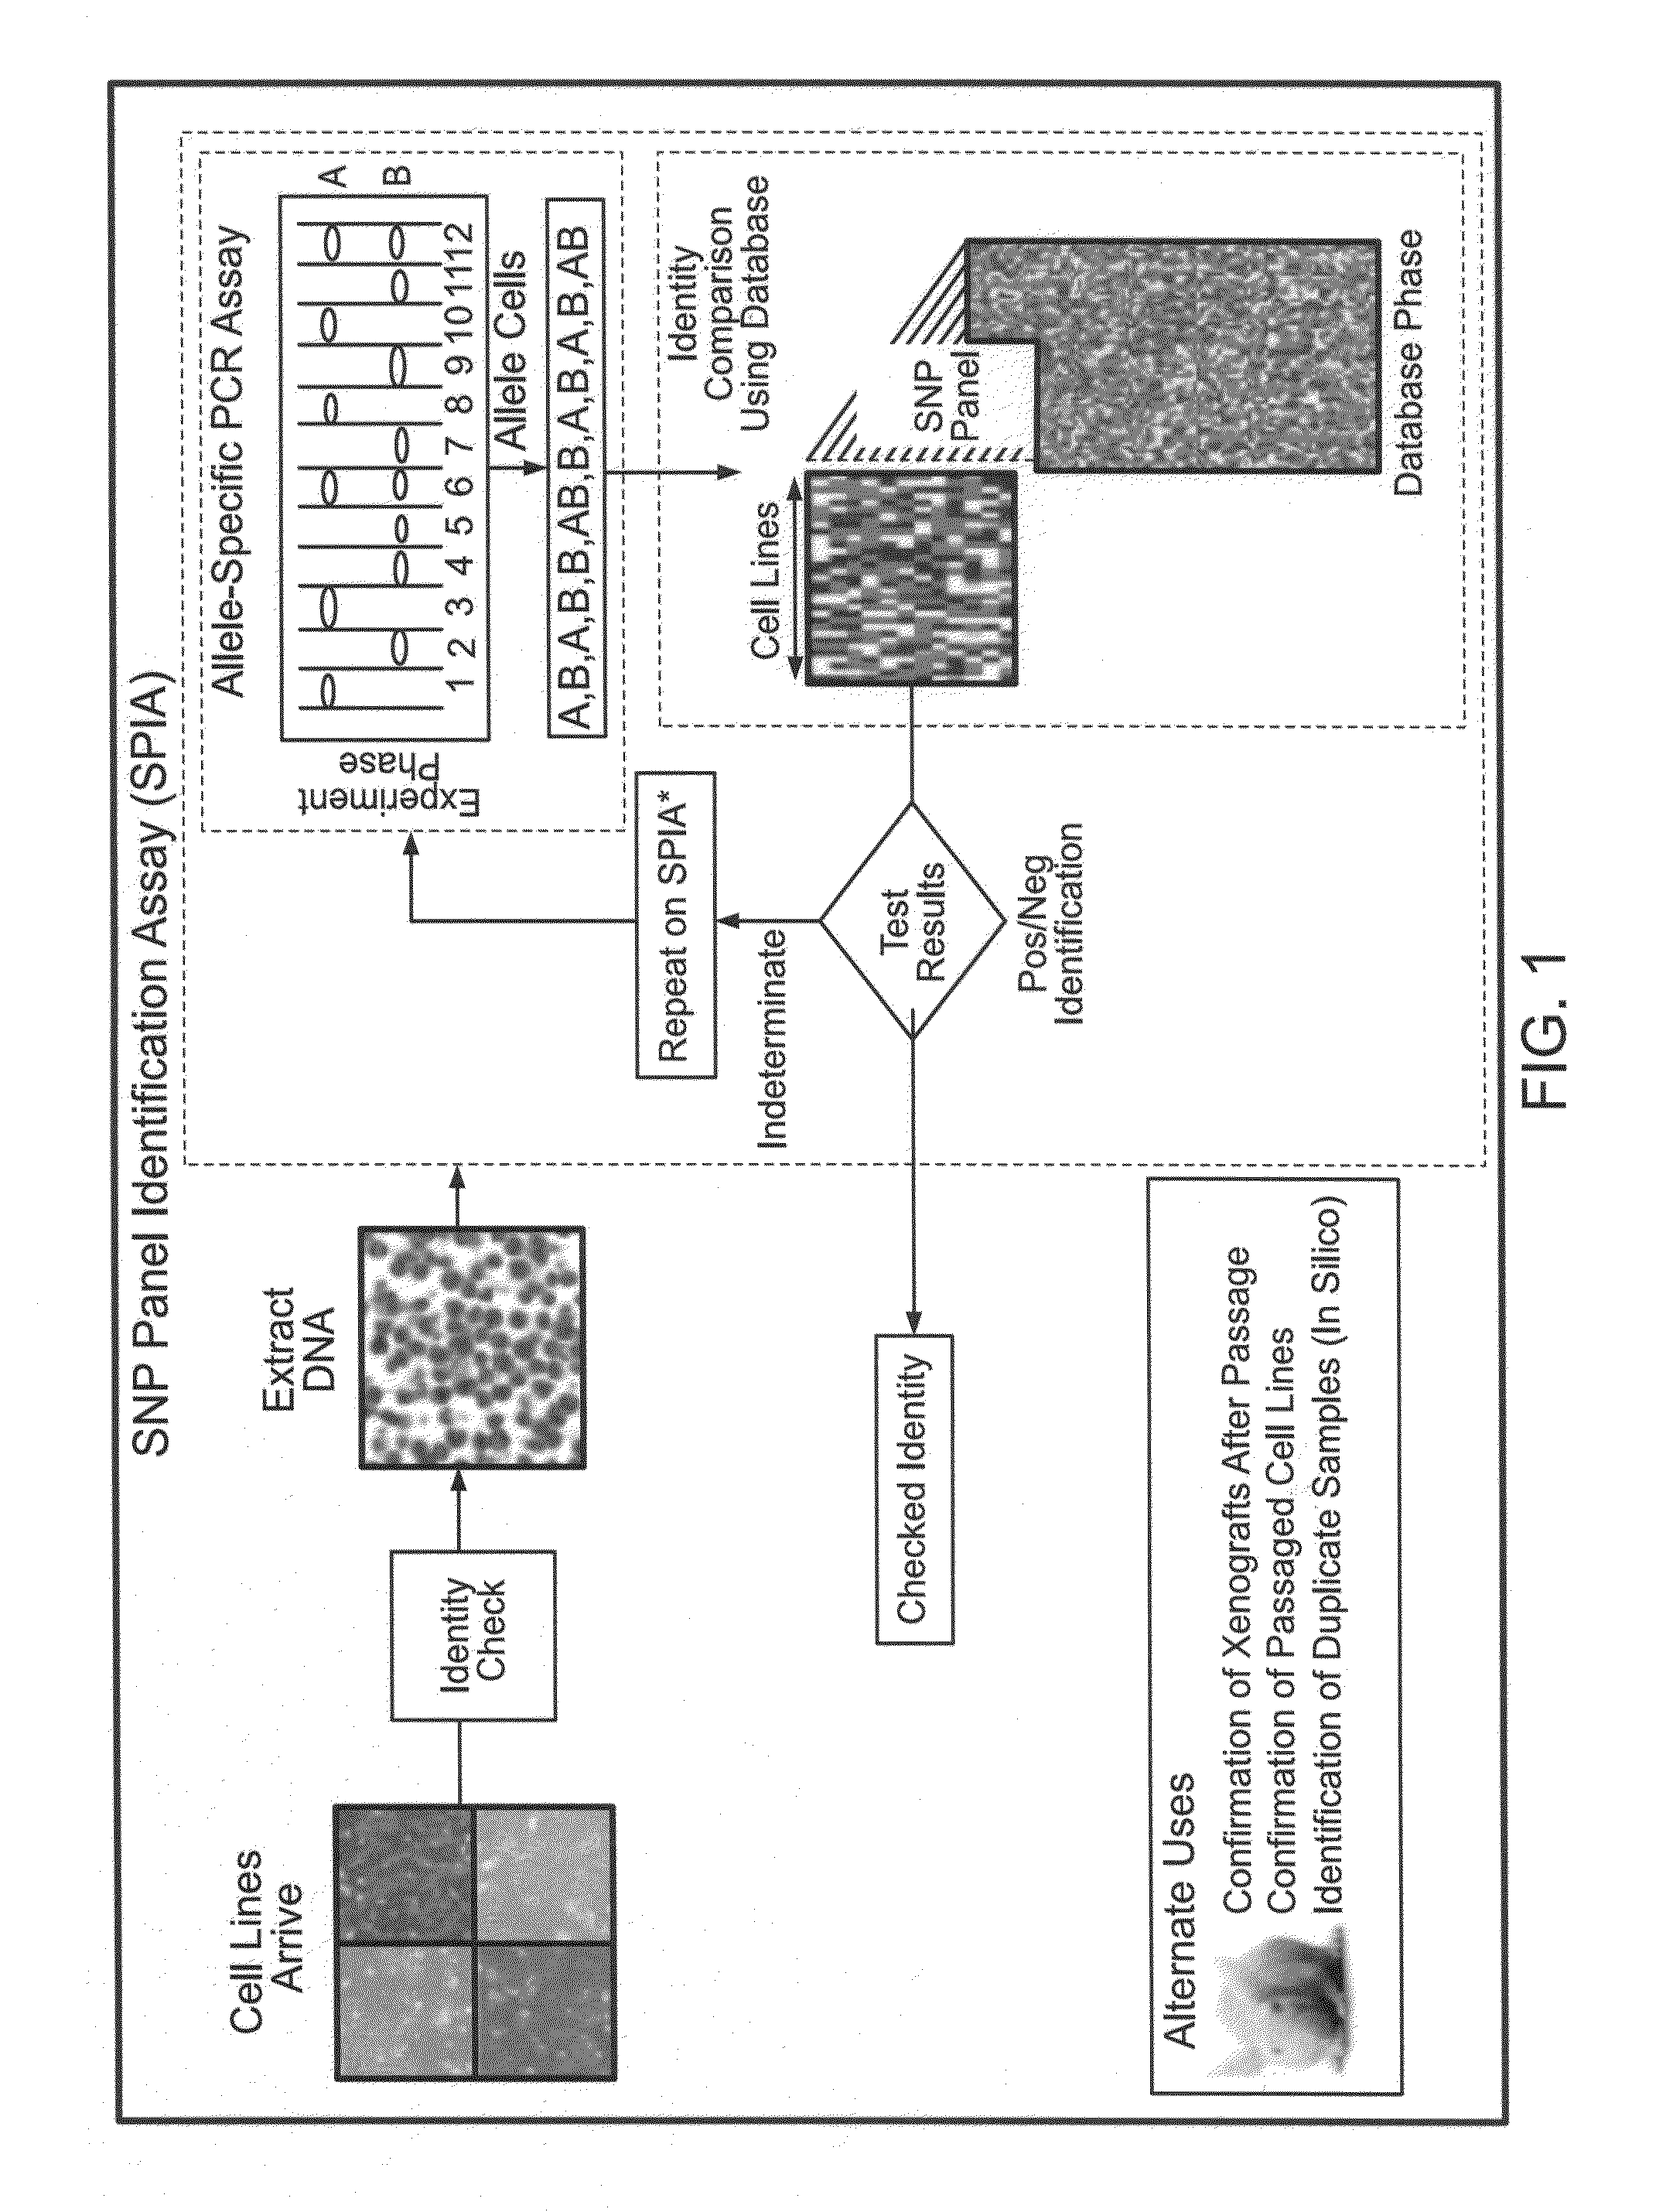 Methods for identifying and using SNP panels